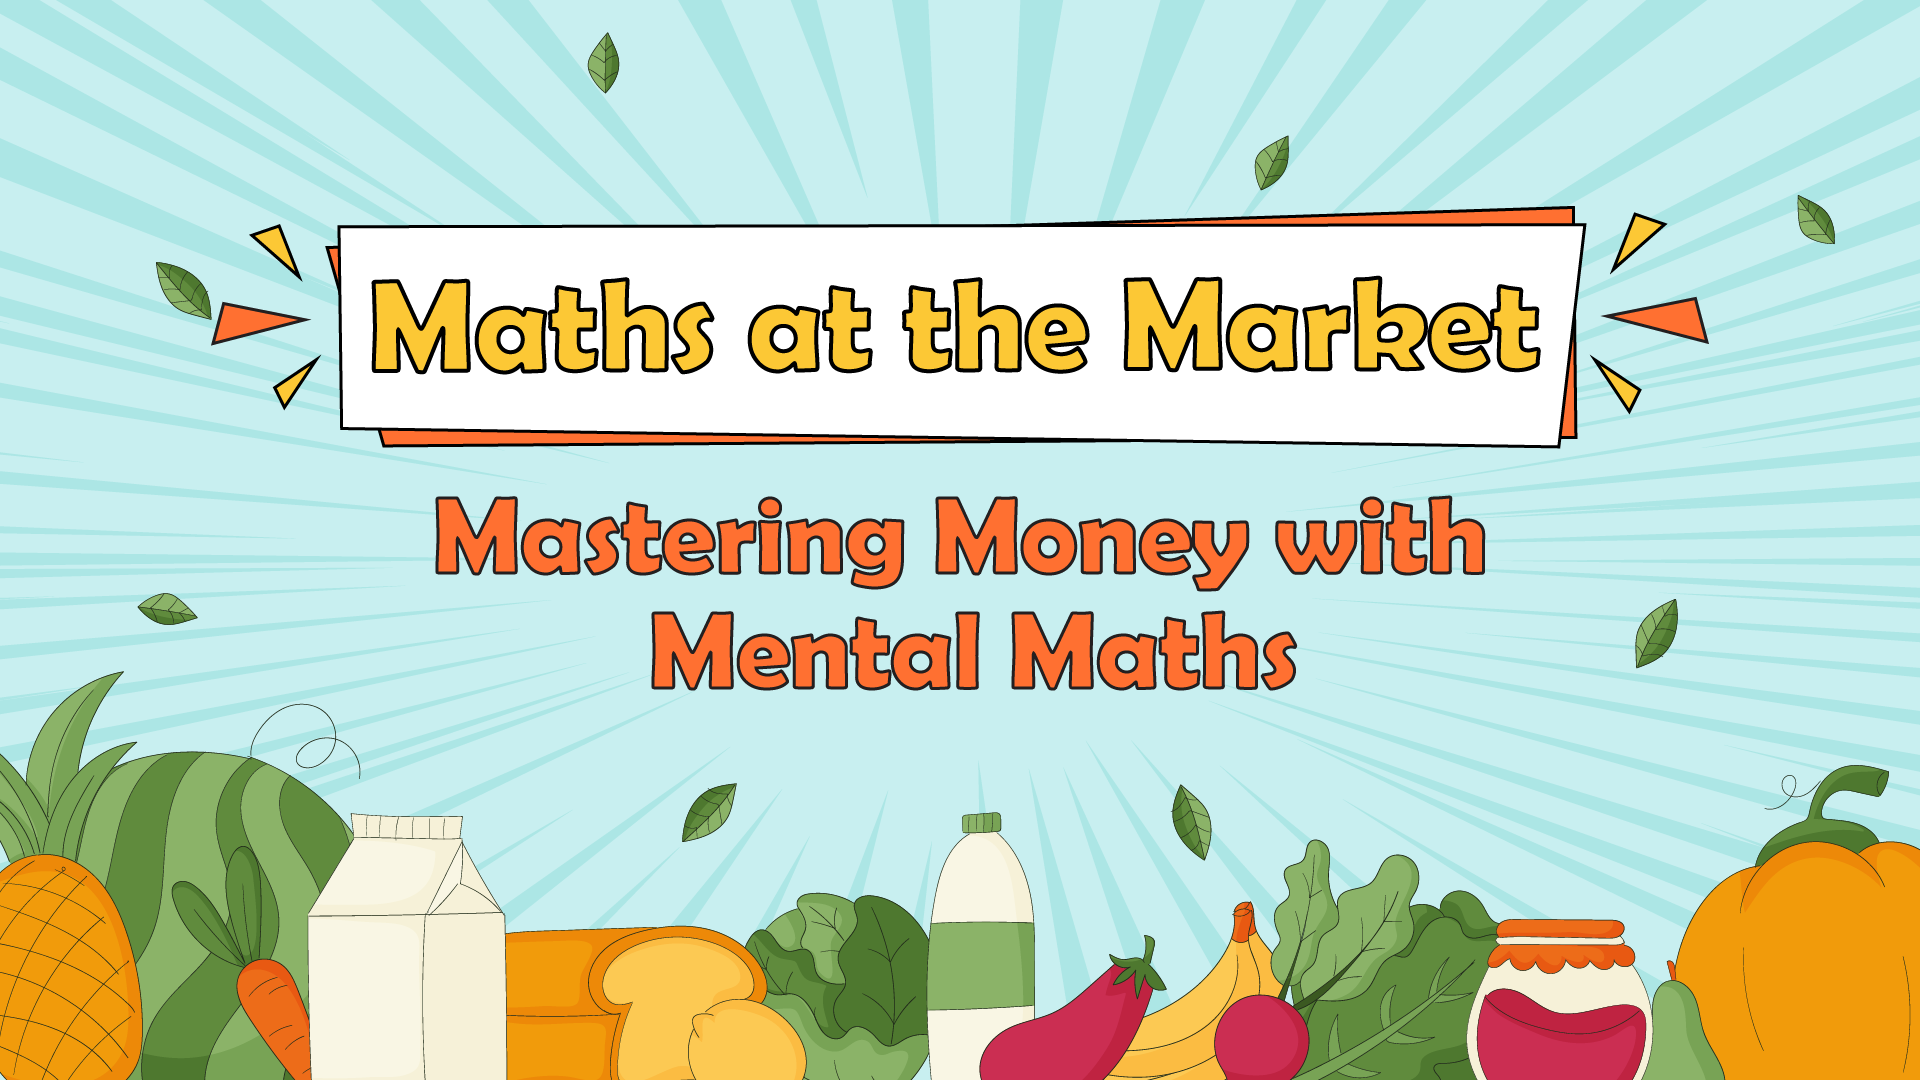 Maths at the Market: Mastering Money with Mental Maths